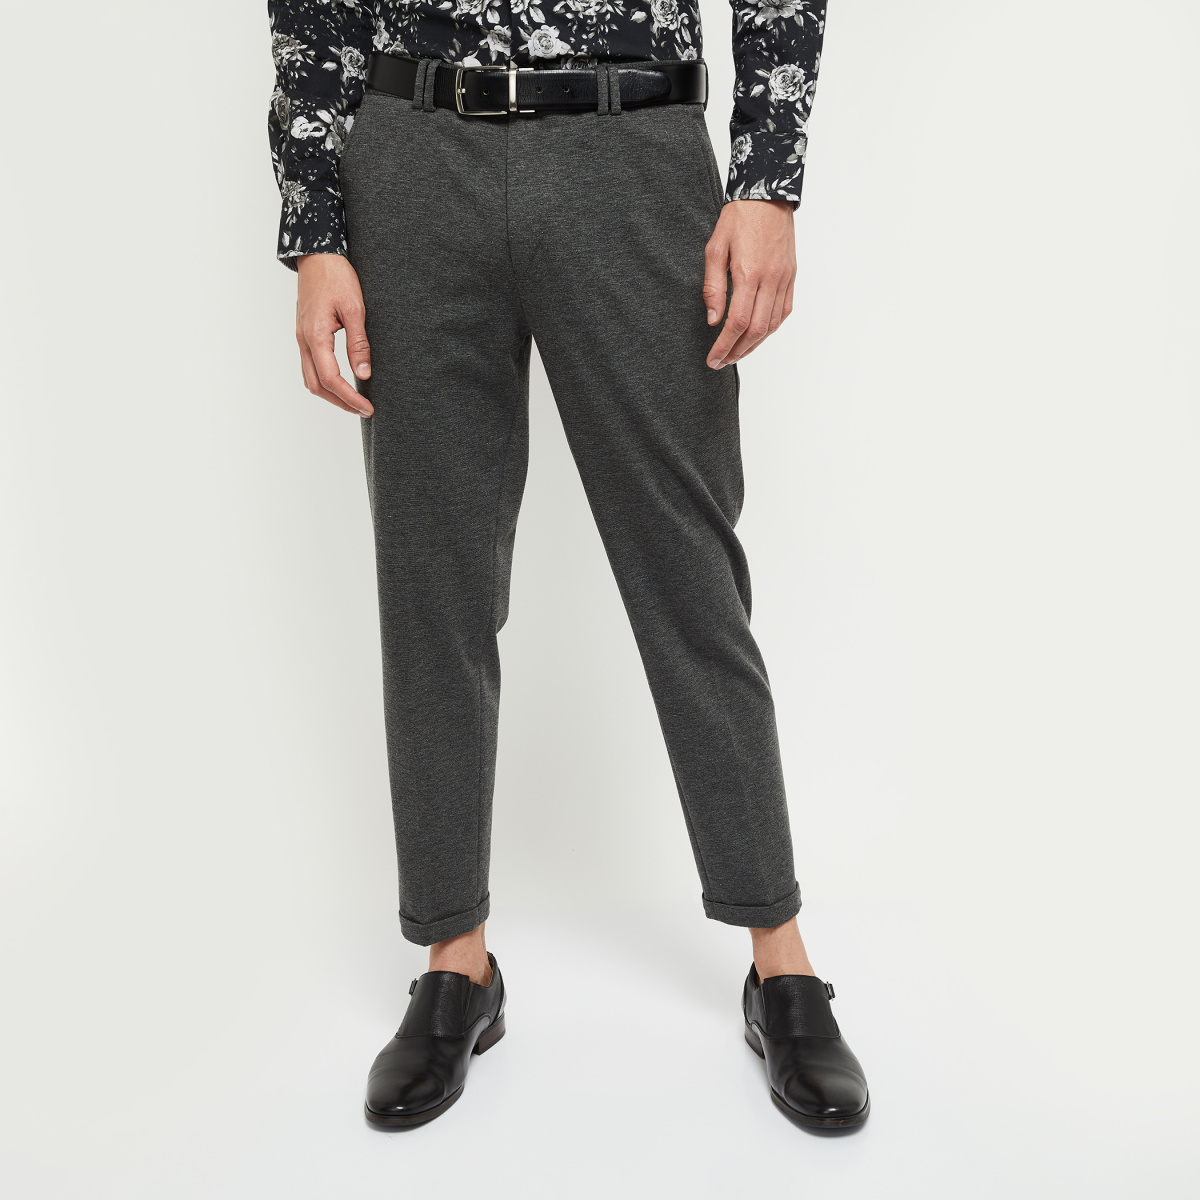 Buy Men Grey Textured Carrot Fit Trousers Online - 350612 | Peter England